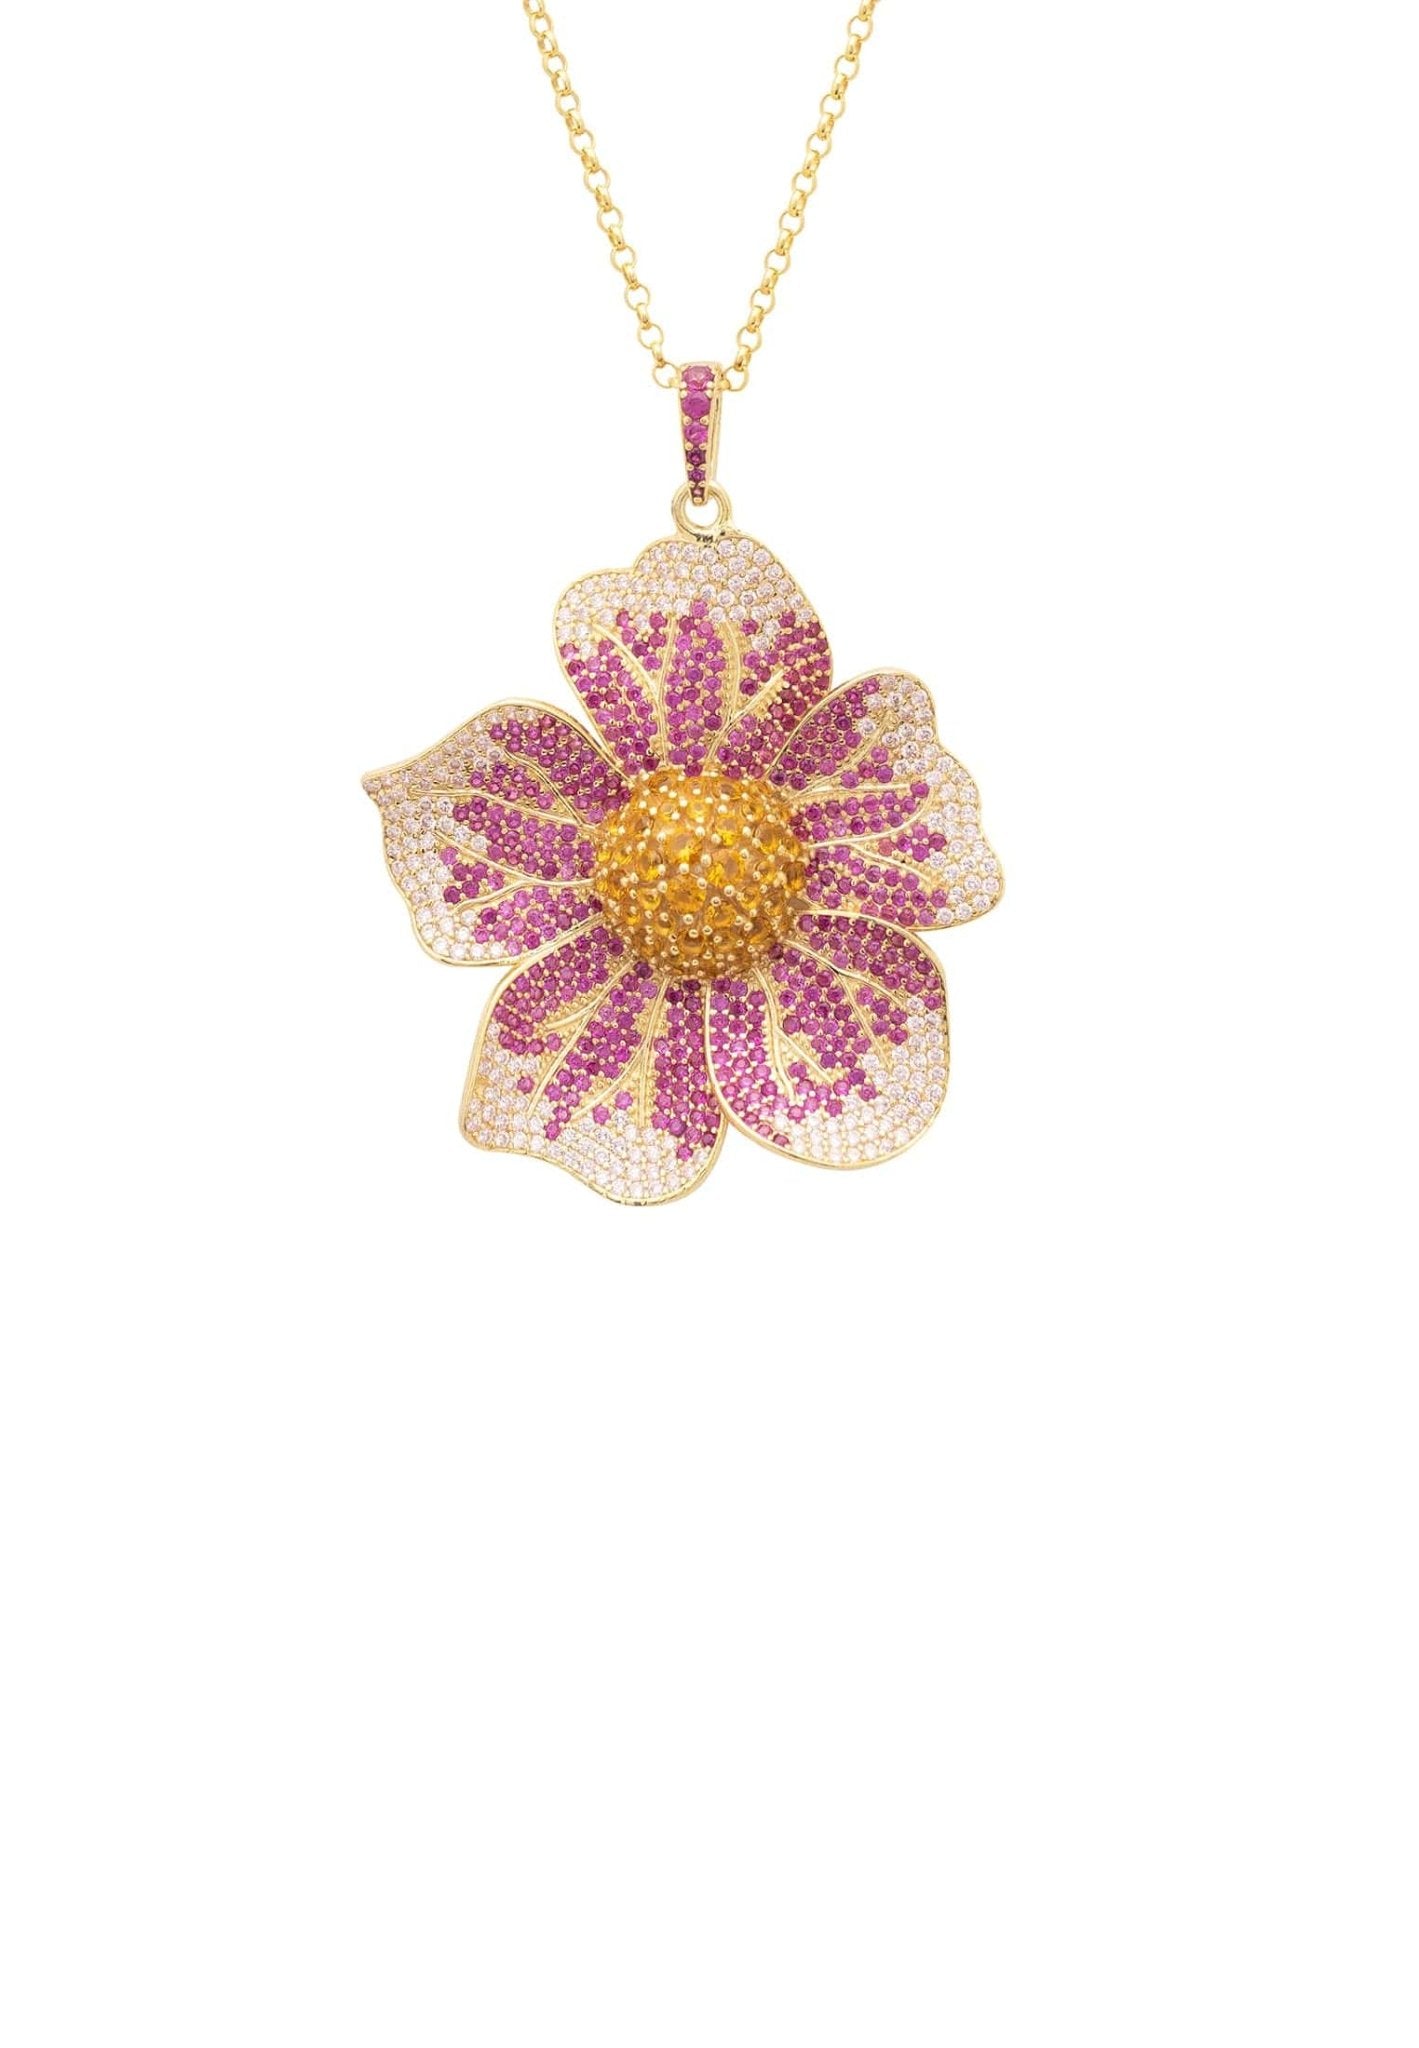 Pansy Flower Pink Necklace Gold - LATELITA Necklaces